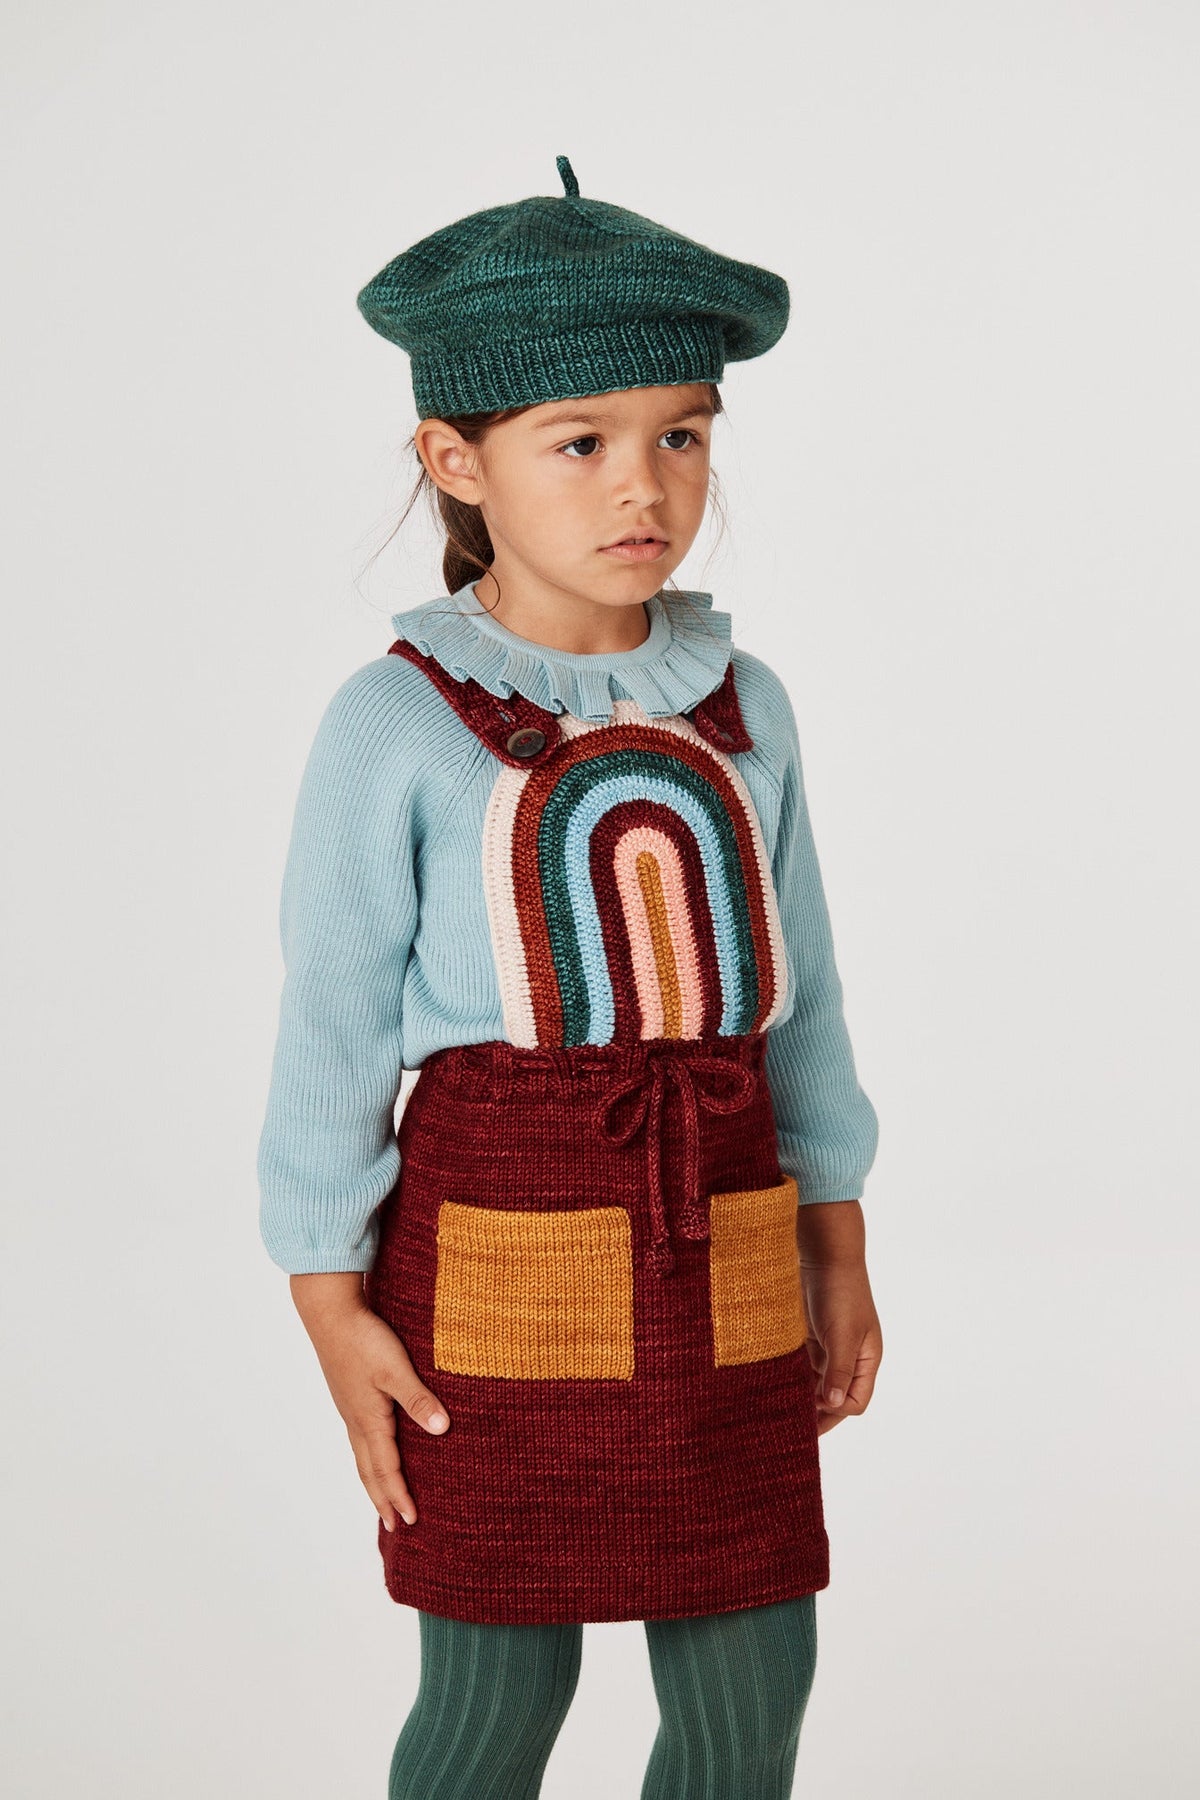 Rainbow Pinafore - Cranberry+Model is 42 inches tall, 40lbs, wearing a size 3-4y